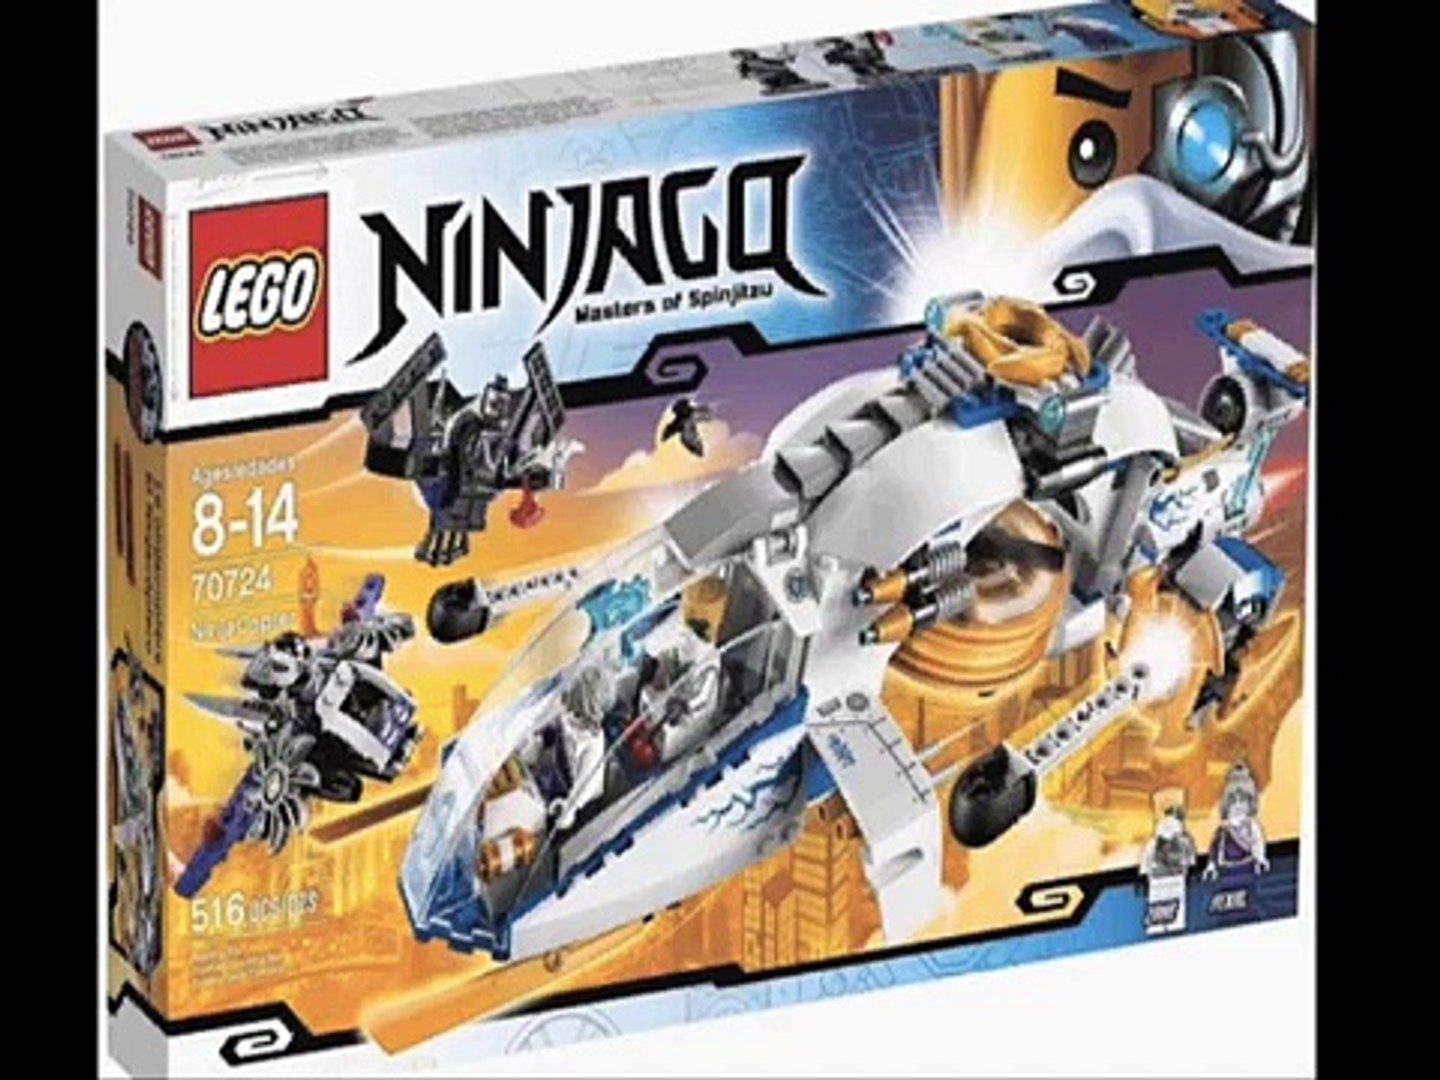 New LEGO Ninjago 2014 Set Pictures - video Dailymotion